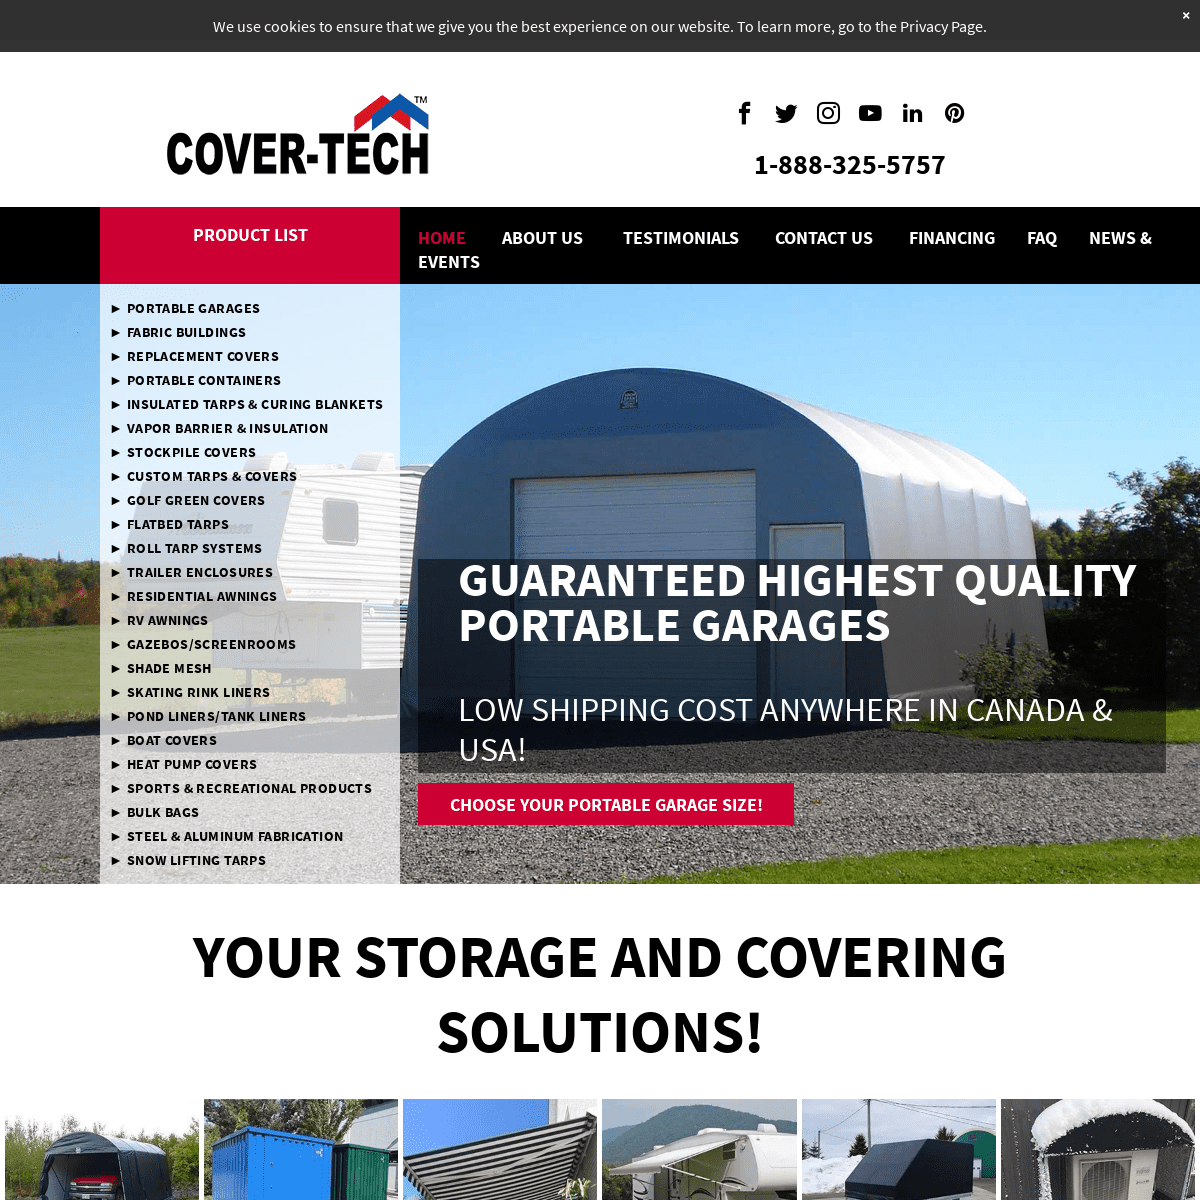 A complete backup of cover-tech.com